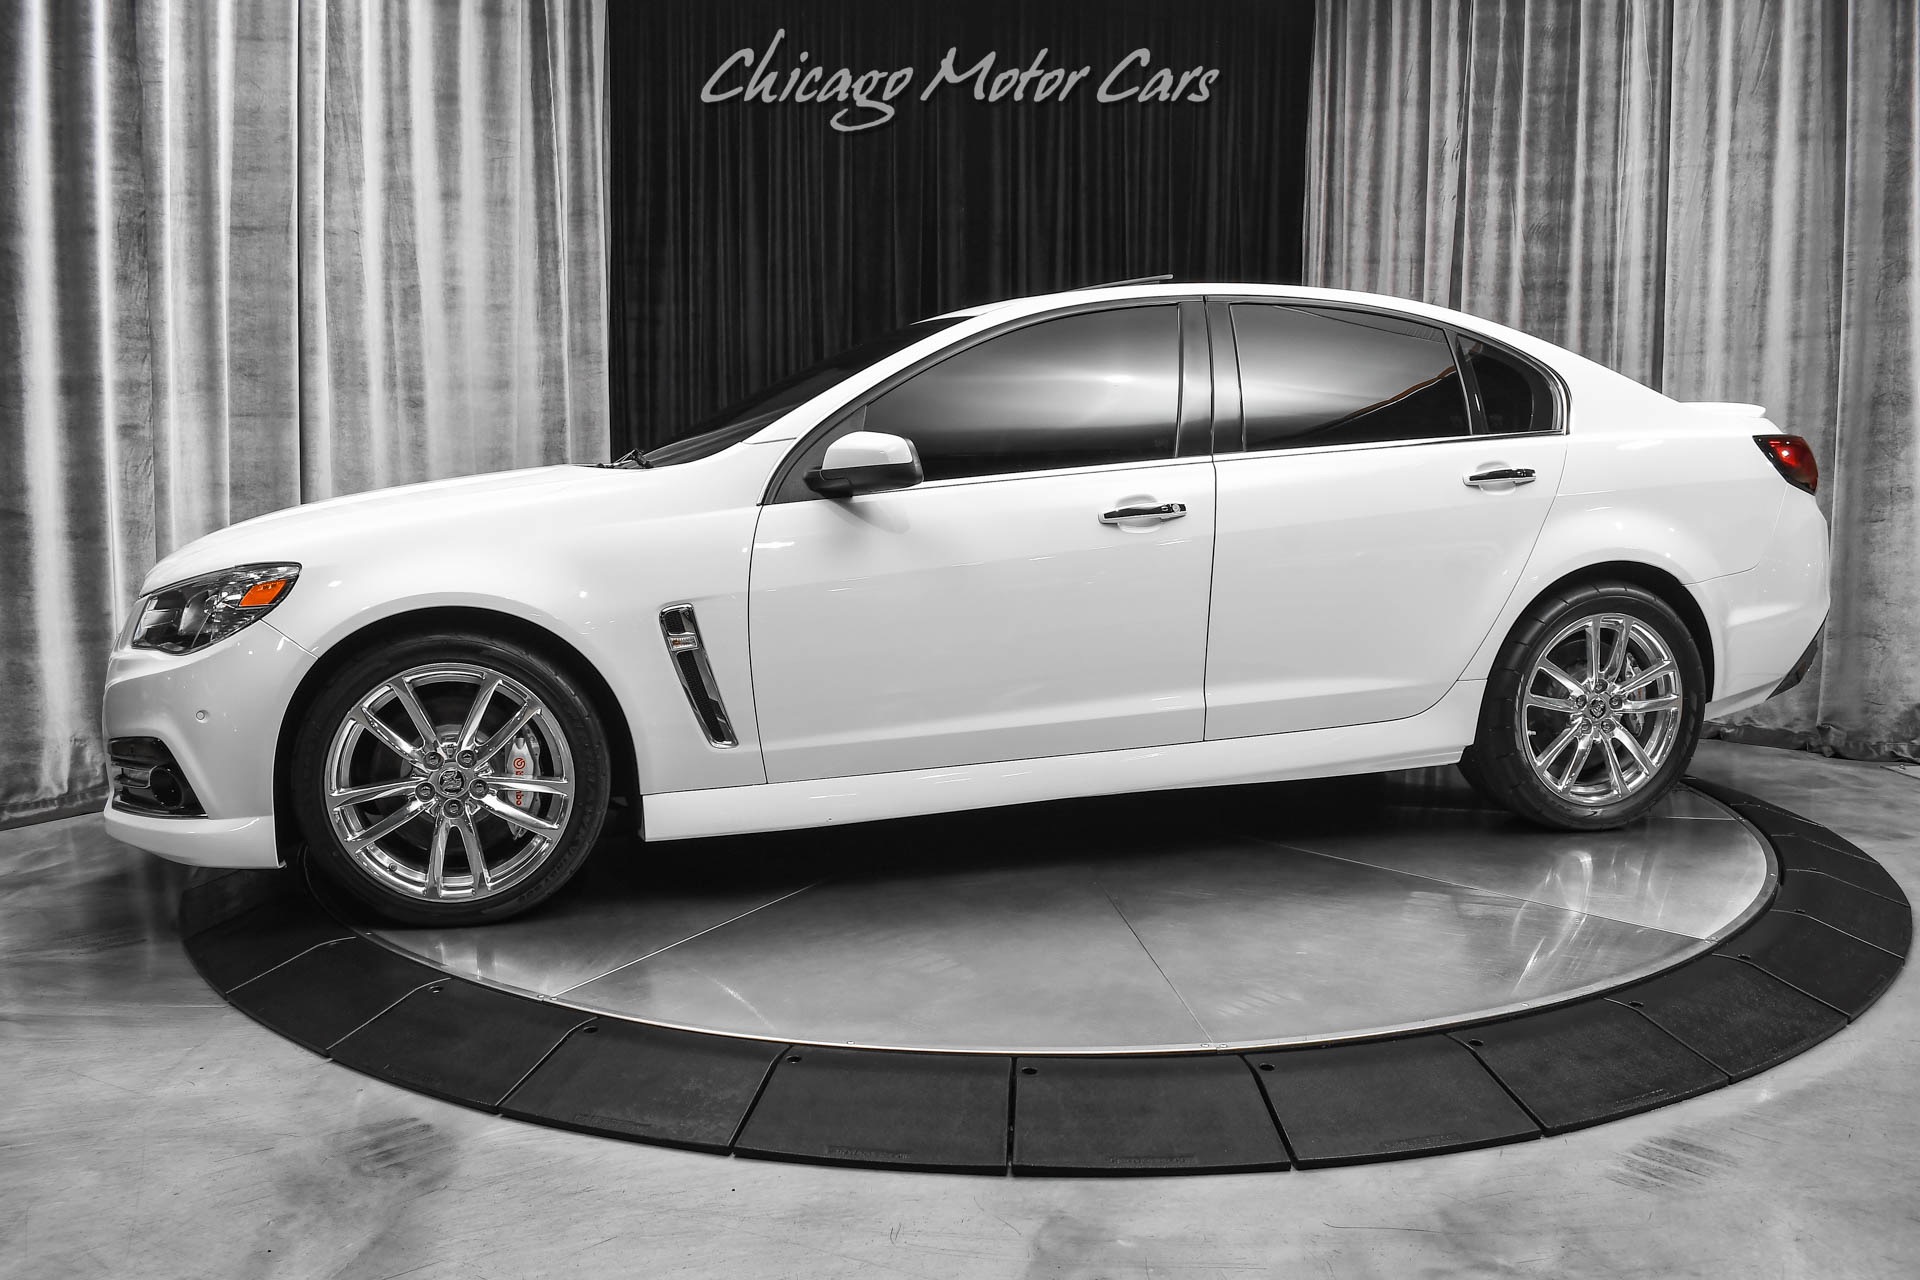 Used-2015-Chevrolet-SS-TVS2650-Supercharged-730RWHP-CAMMED-STREET-SLEEPER